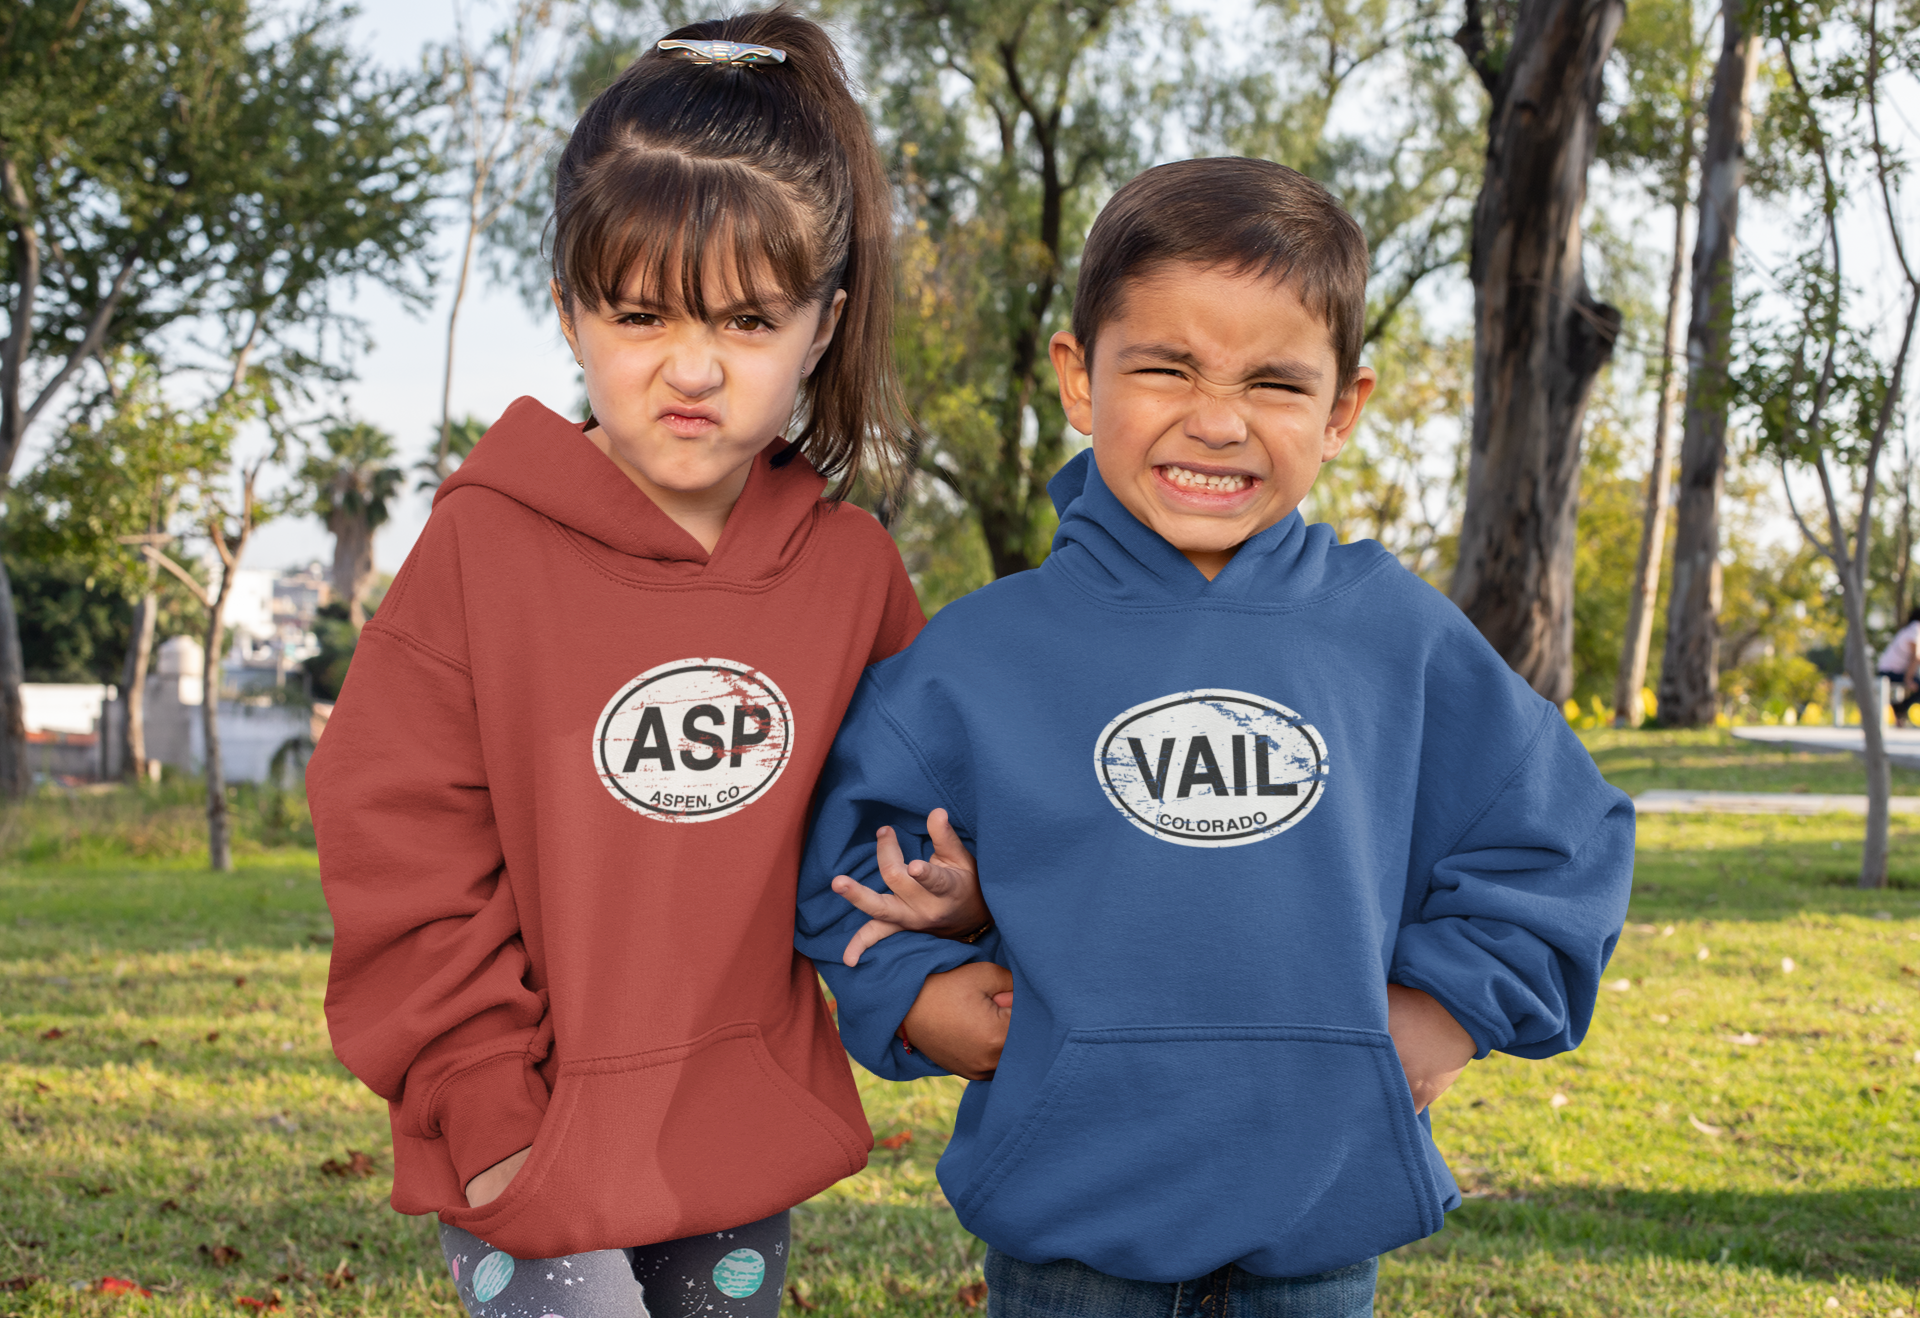 Vail Youth Hoodie | Classic Oval Logo Youth Hoodie Souvenir Gift - My Destination Location